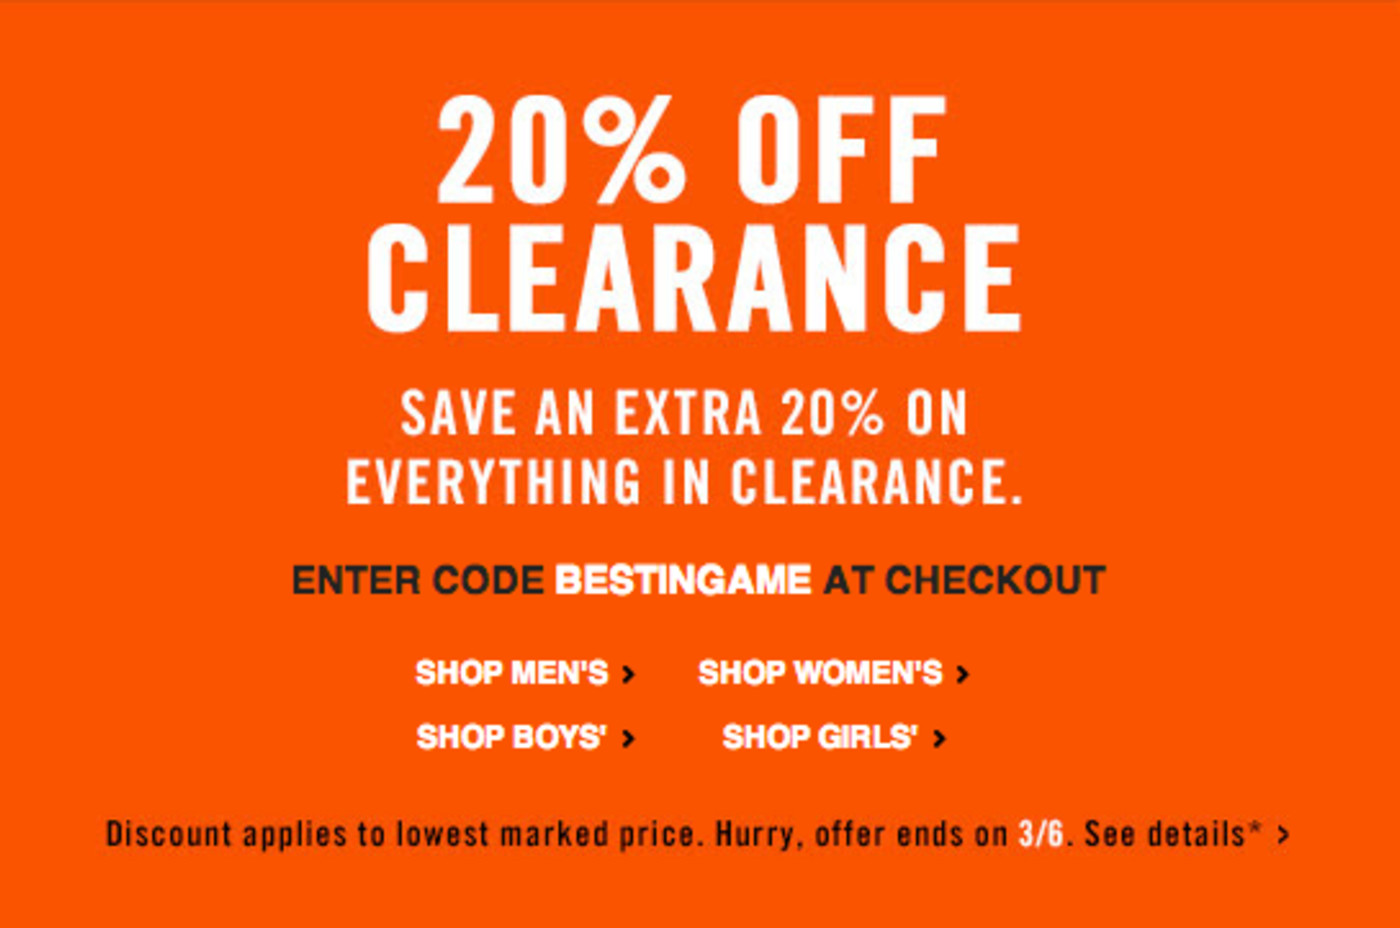 Percent Off Clearance Sneakers 